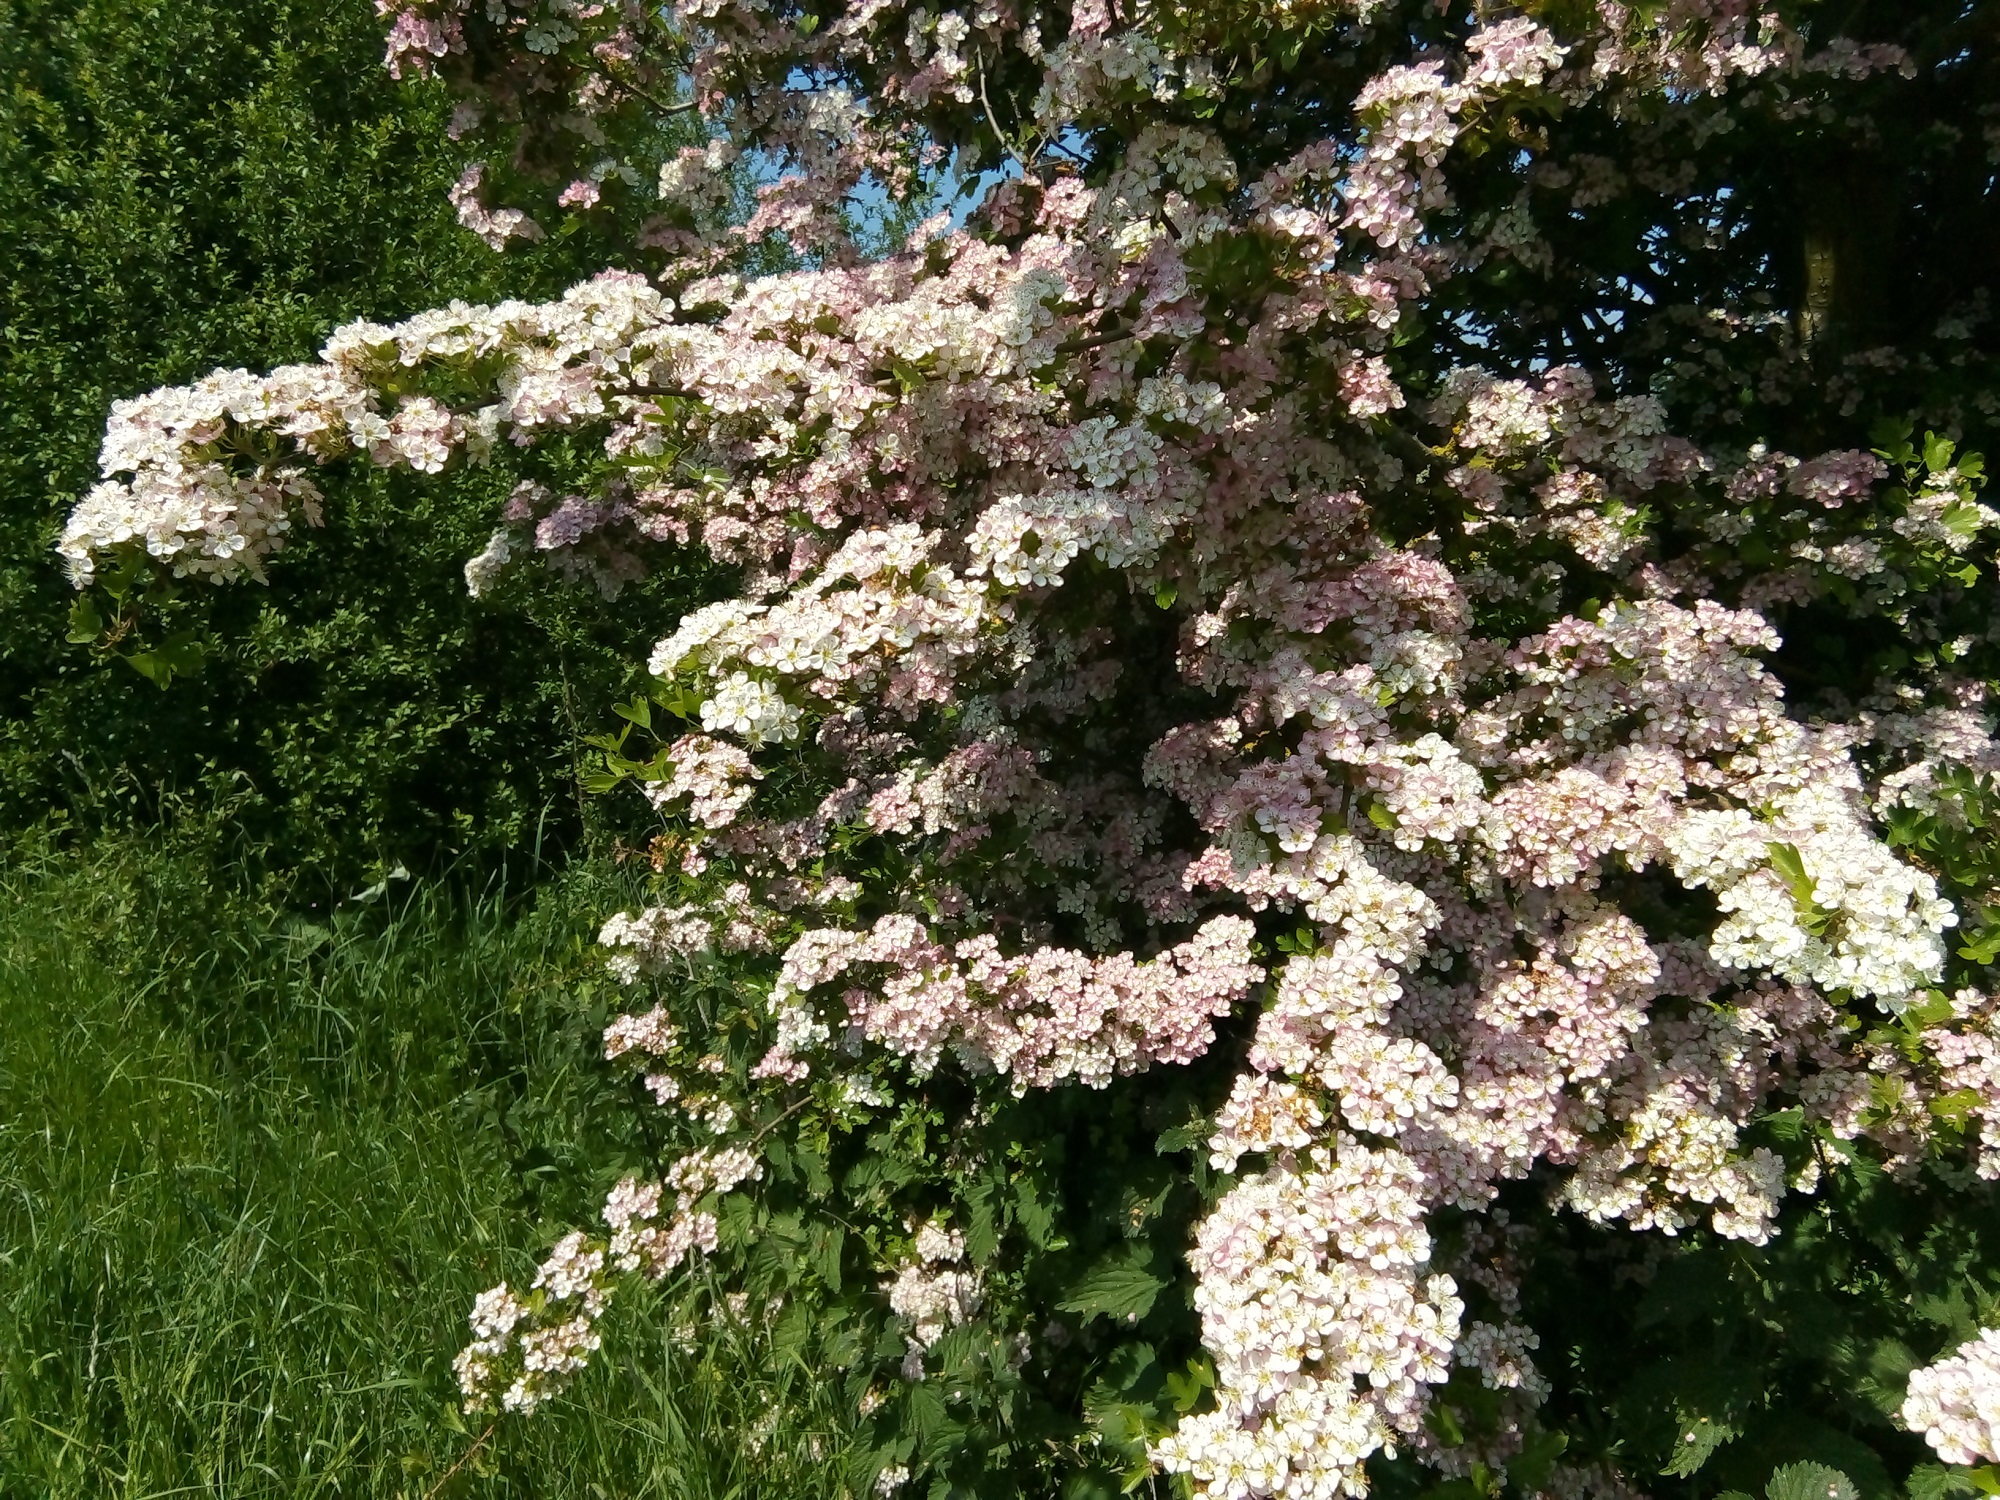 A hawthorn plant in full blossom on a sunny late spring day.